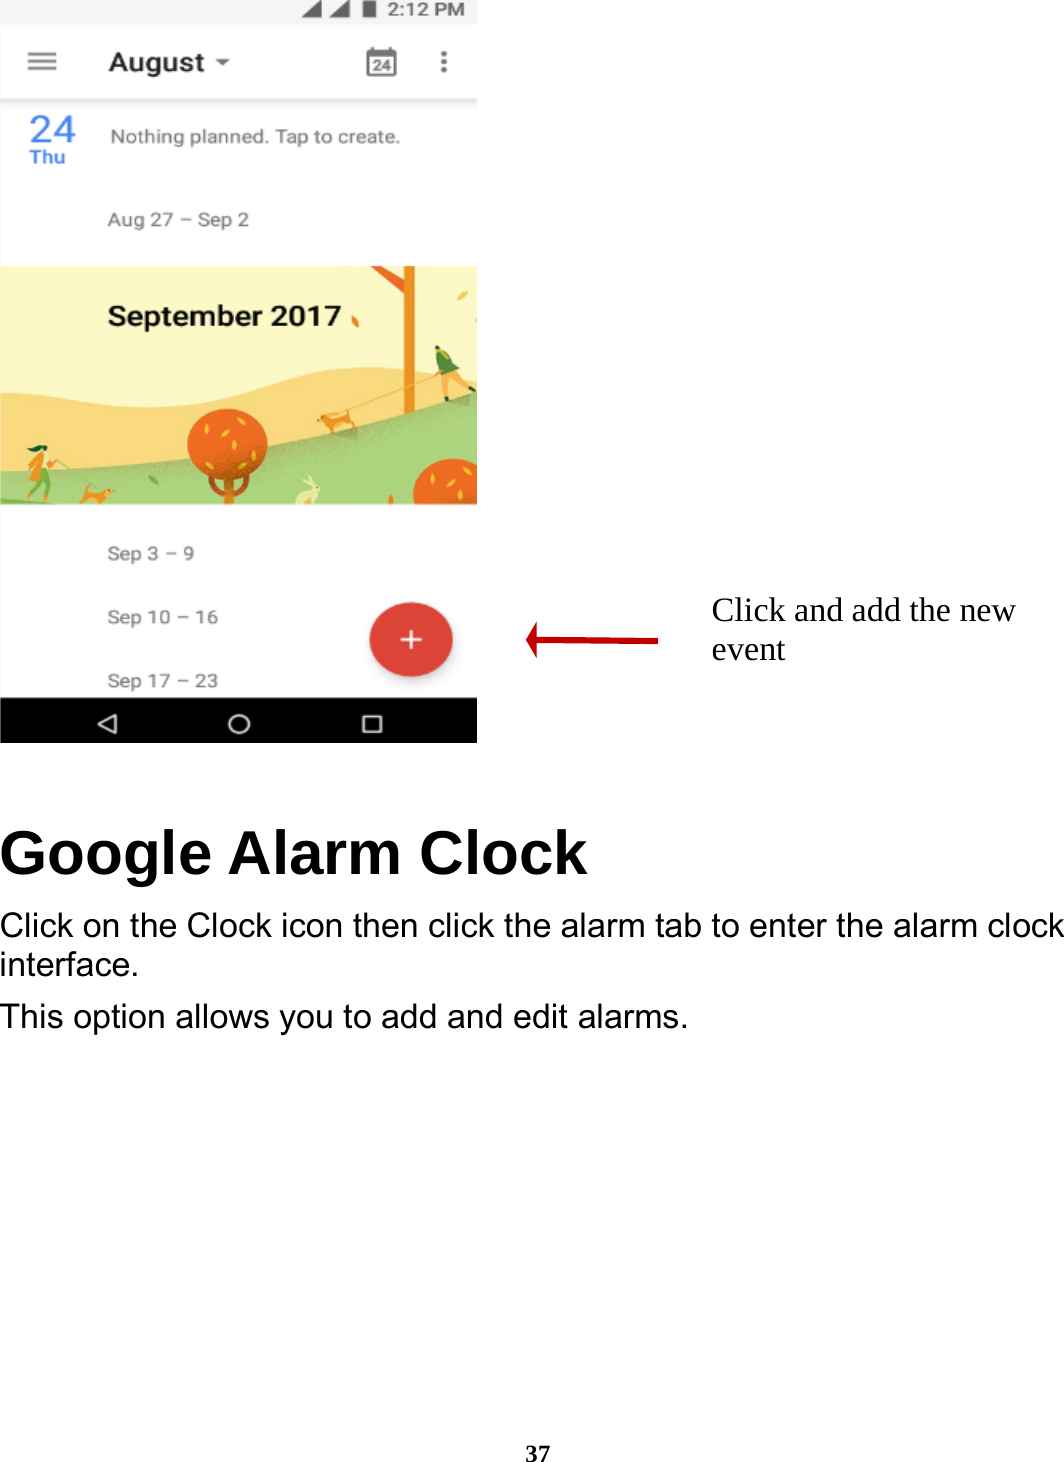  37  Google Alarm Clock Click on the Clock icon then click the alarm tab to enter the alarm clock interface.  This option allows you to add and edit alarms. Click and add the new event   